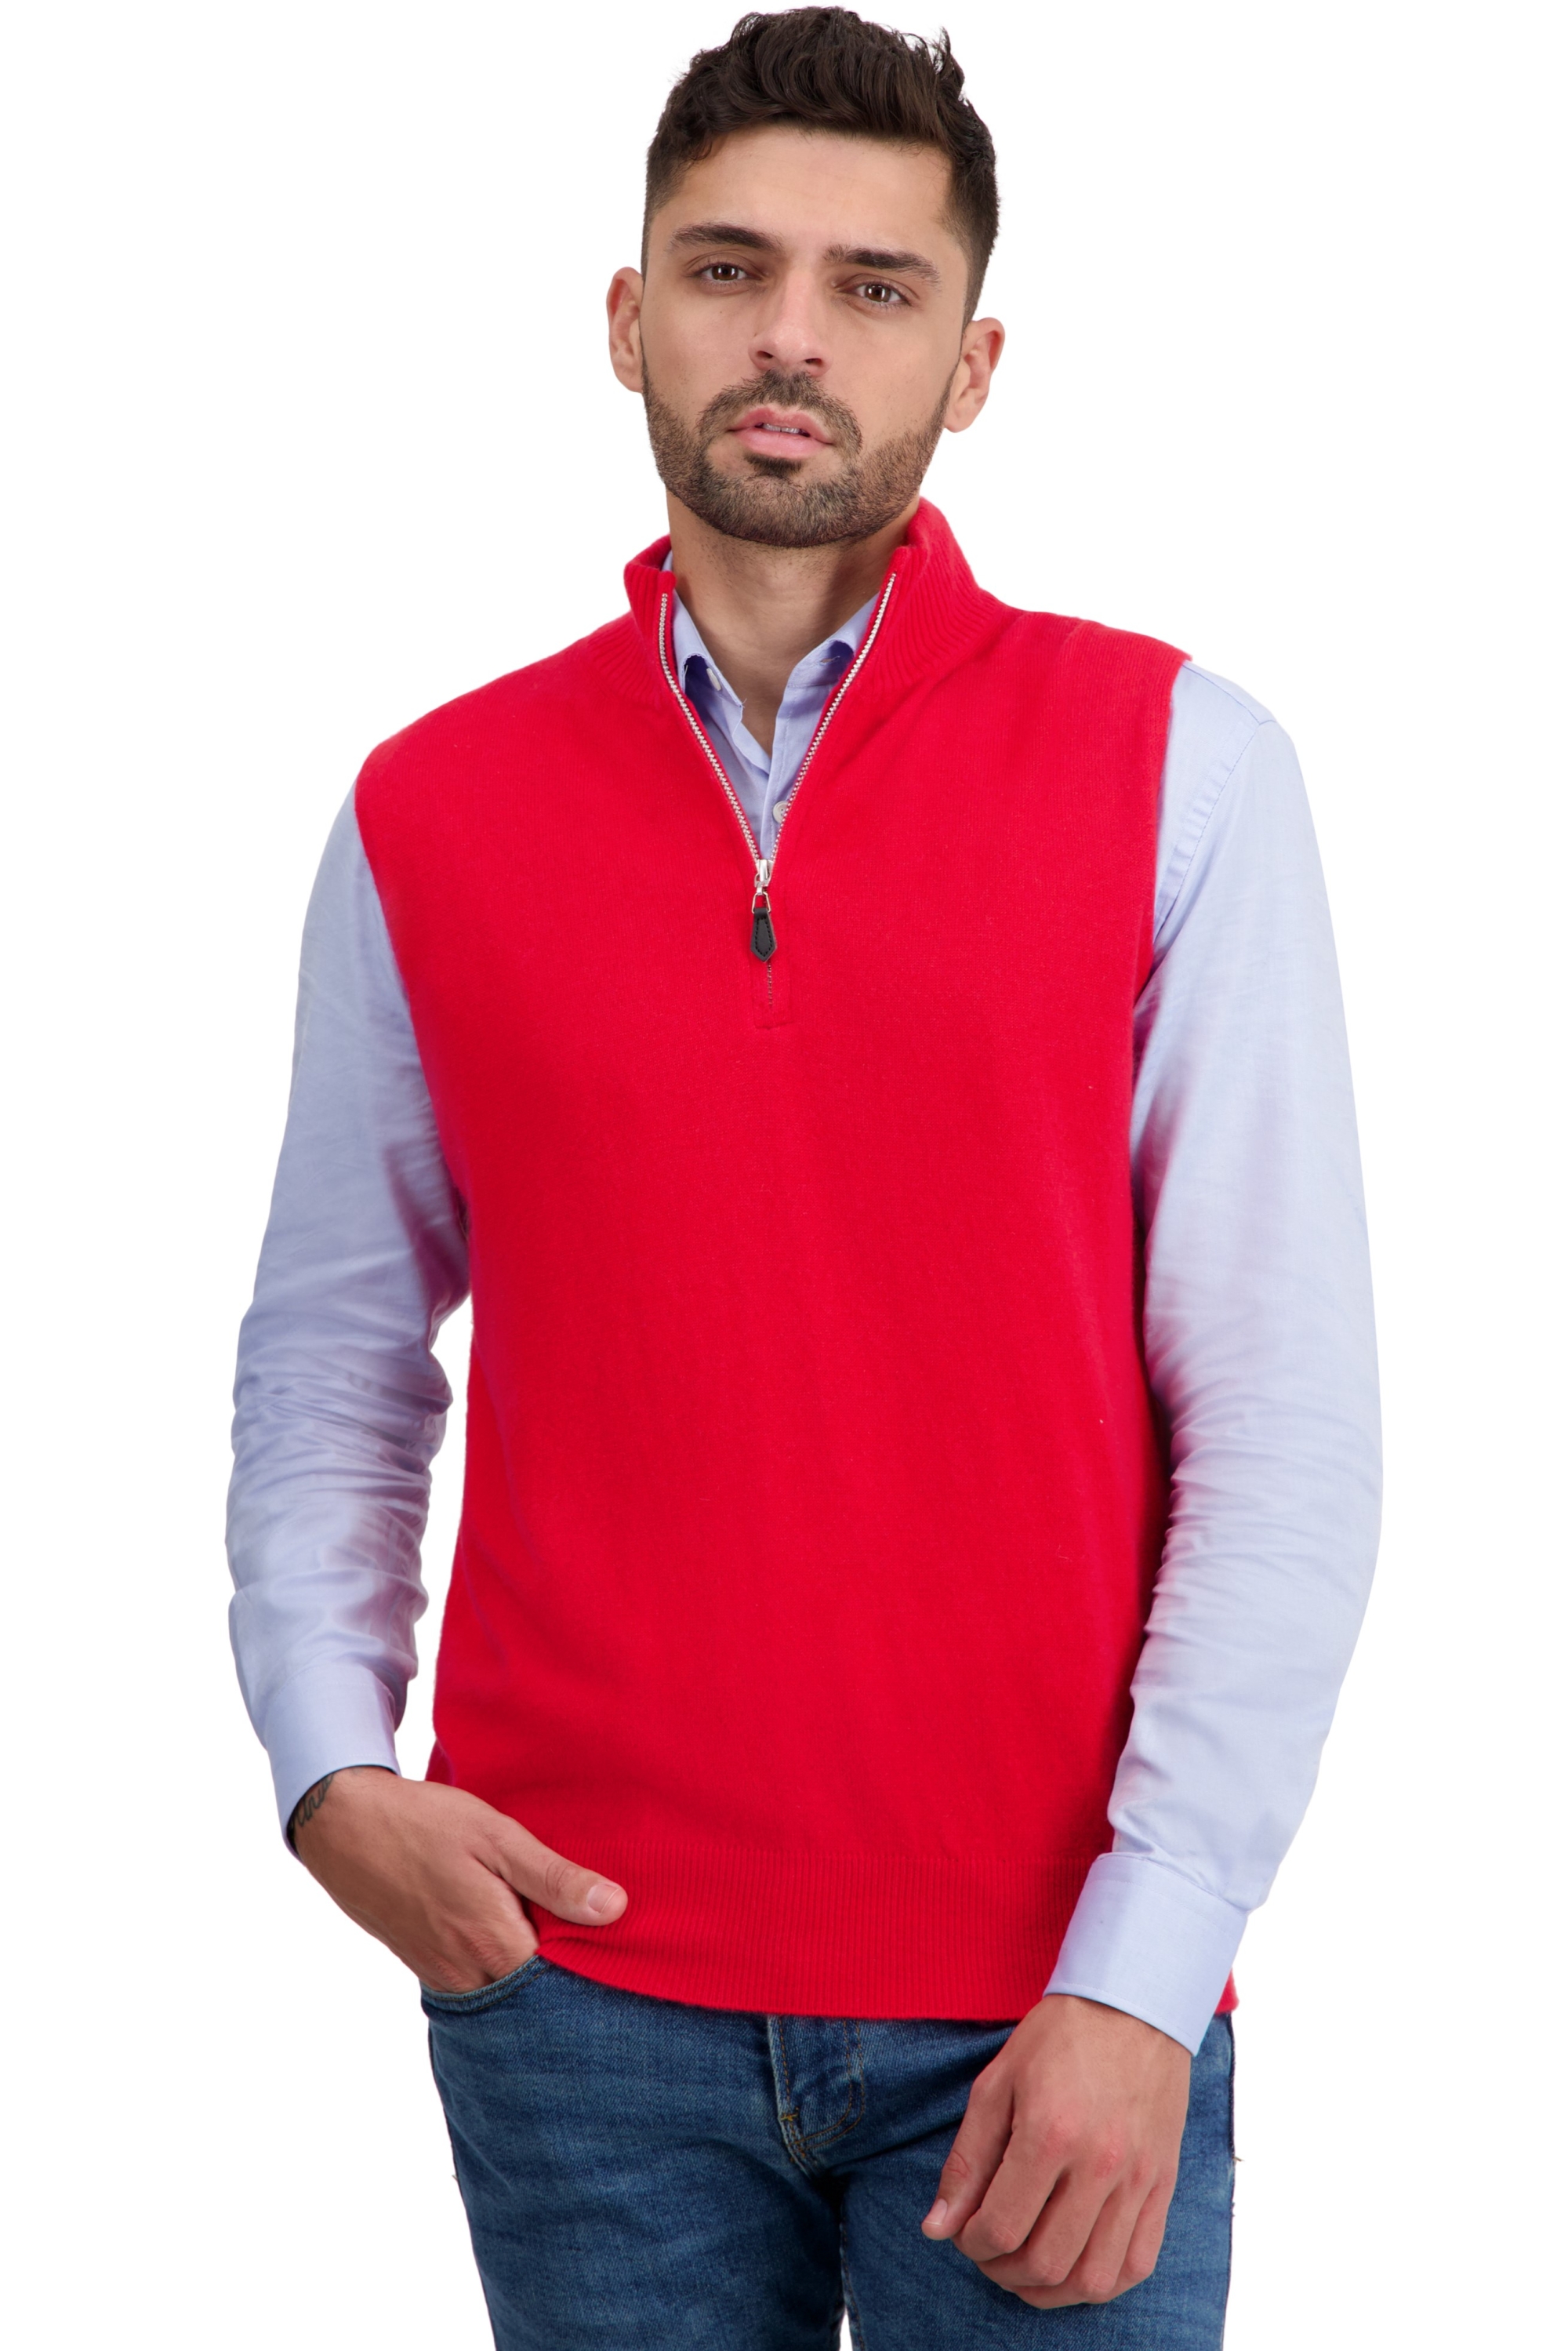 Cachemire pull homme texas rouge xs